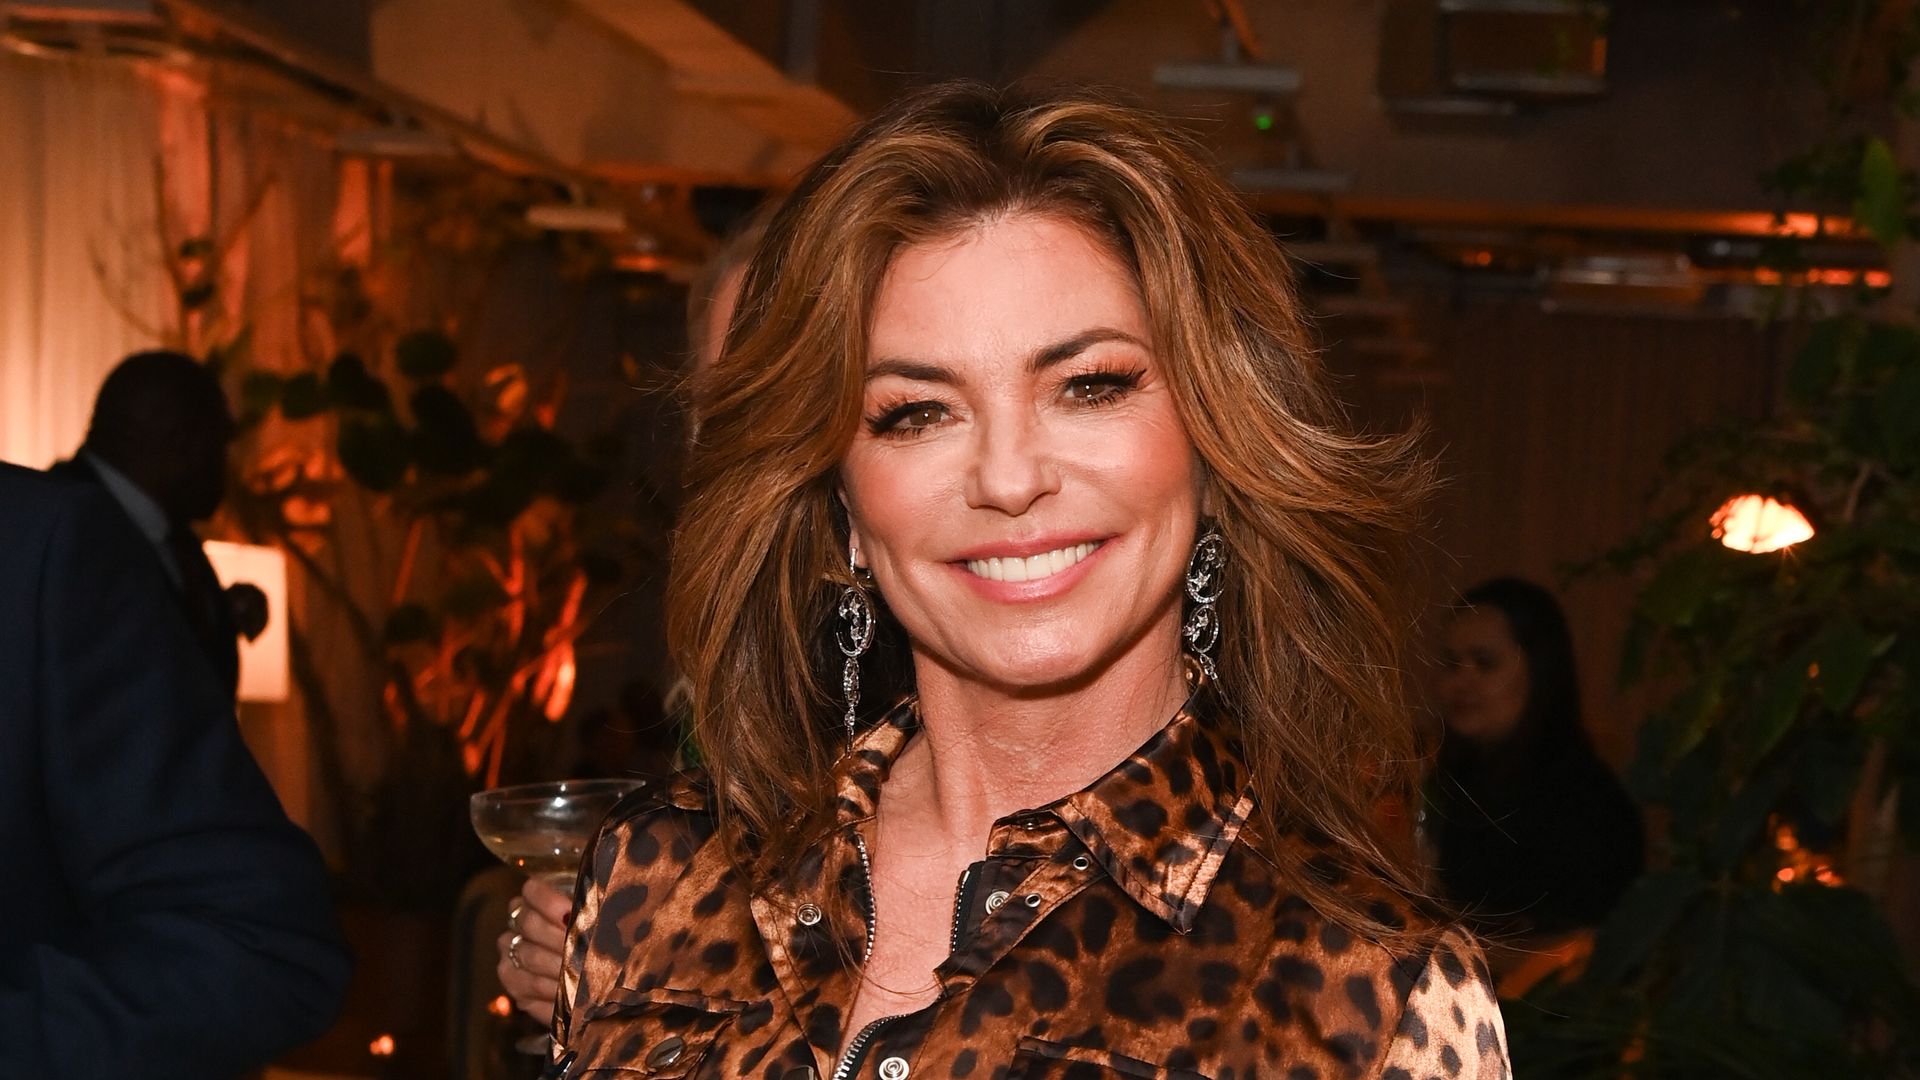 Shania Twain attends the Universal Music BRIT Awards after party 2023 at 180 The Strand on February 11, 2023 in London, England